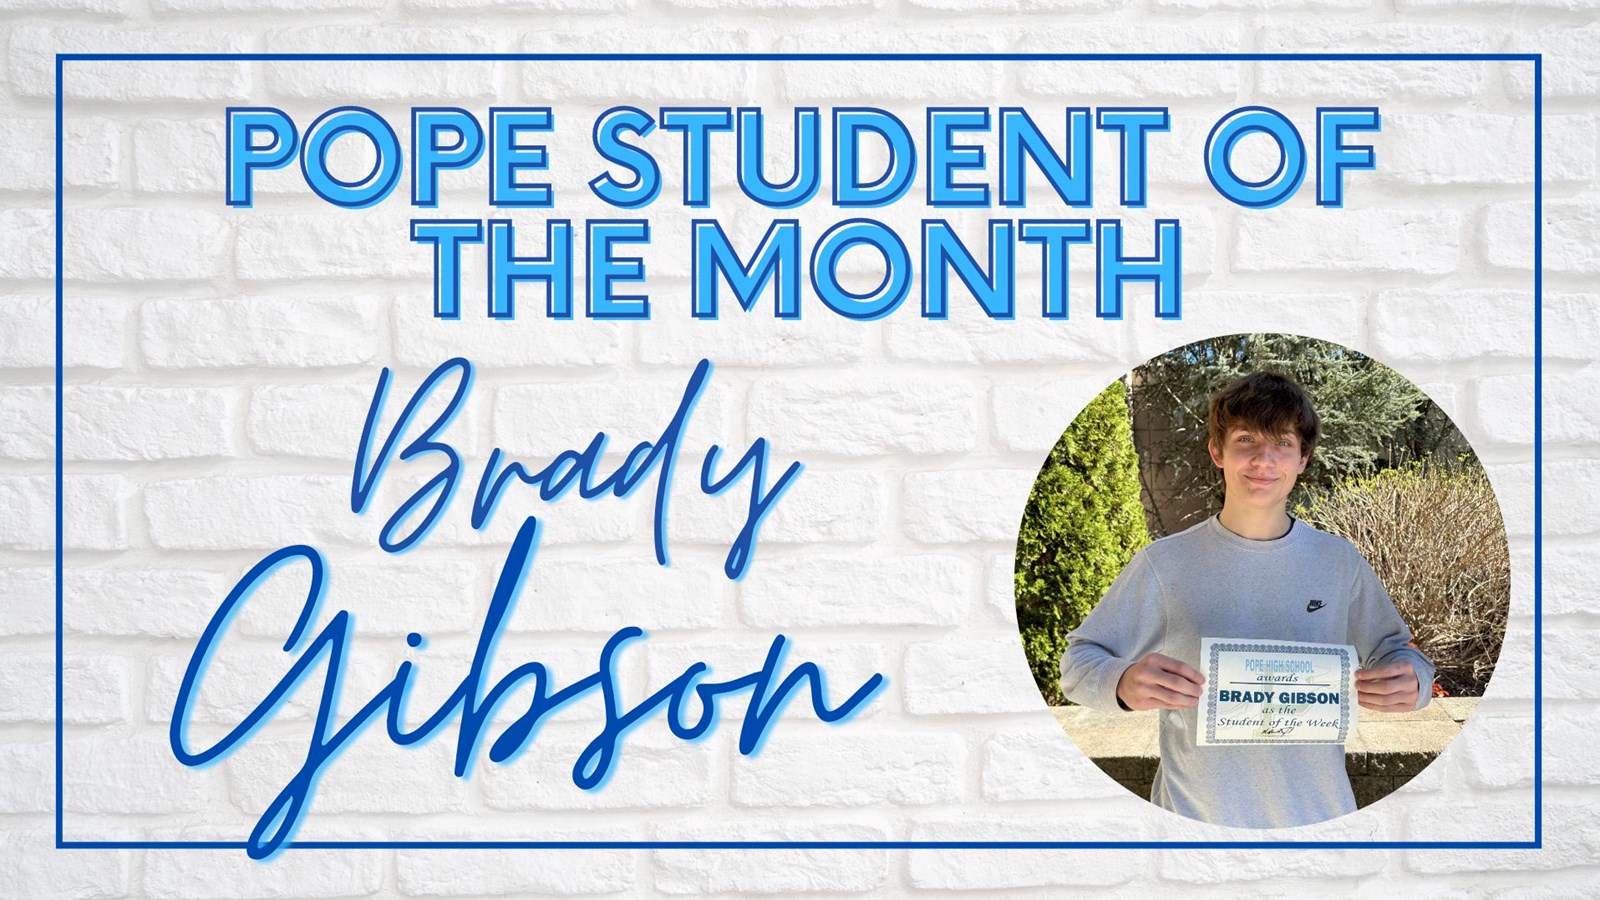 student of the month